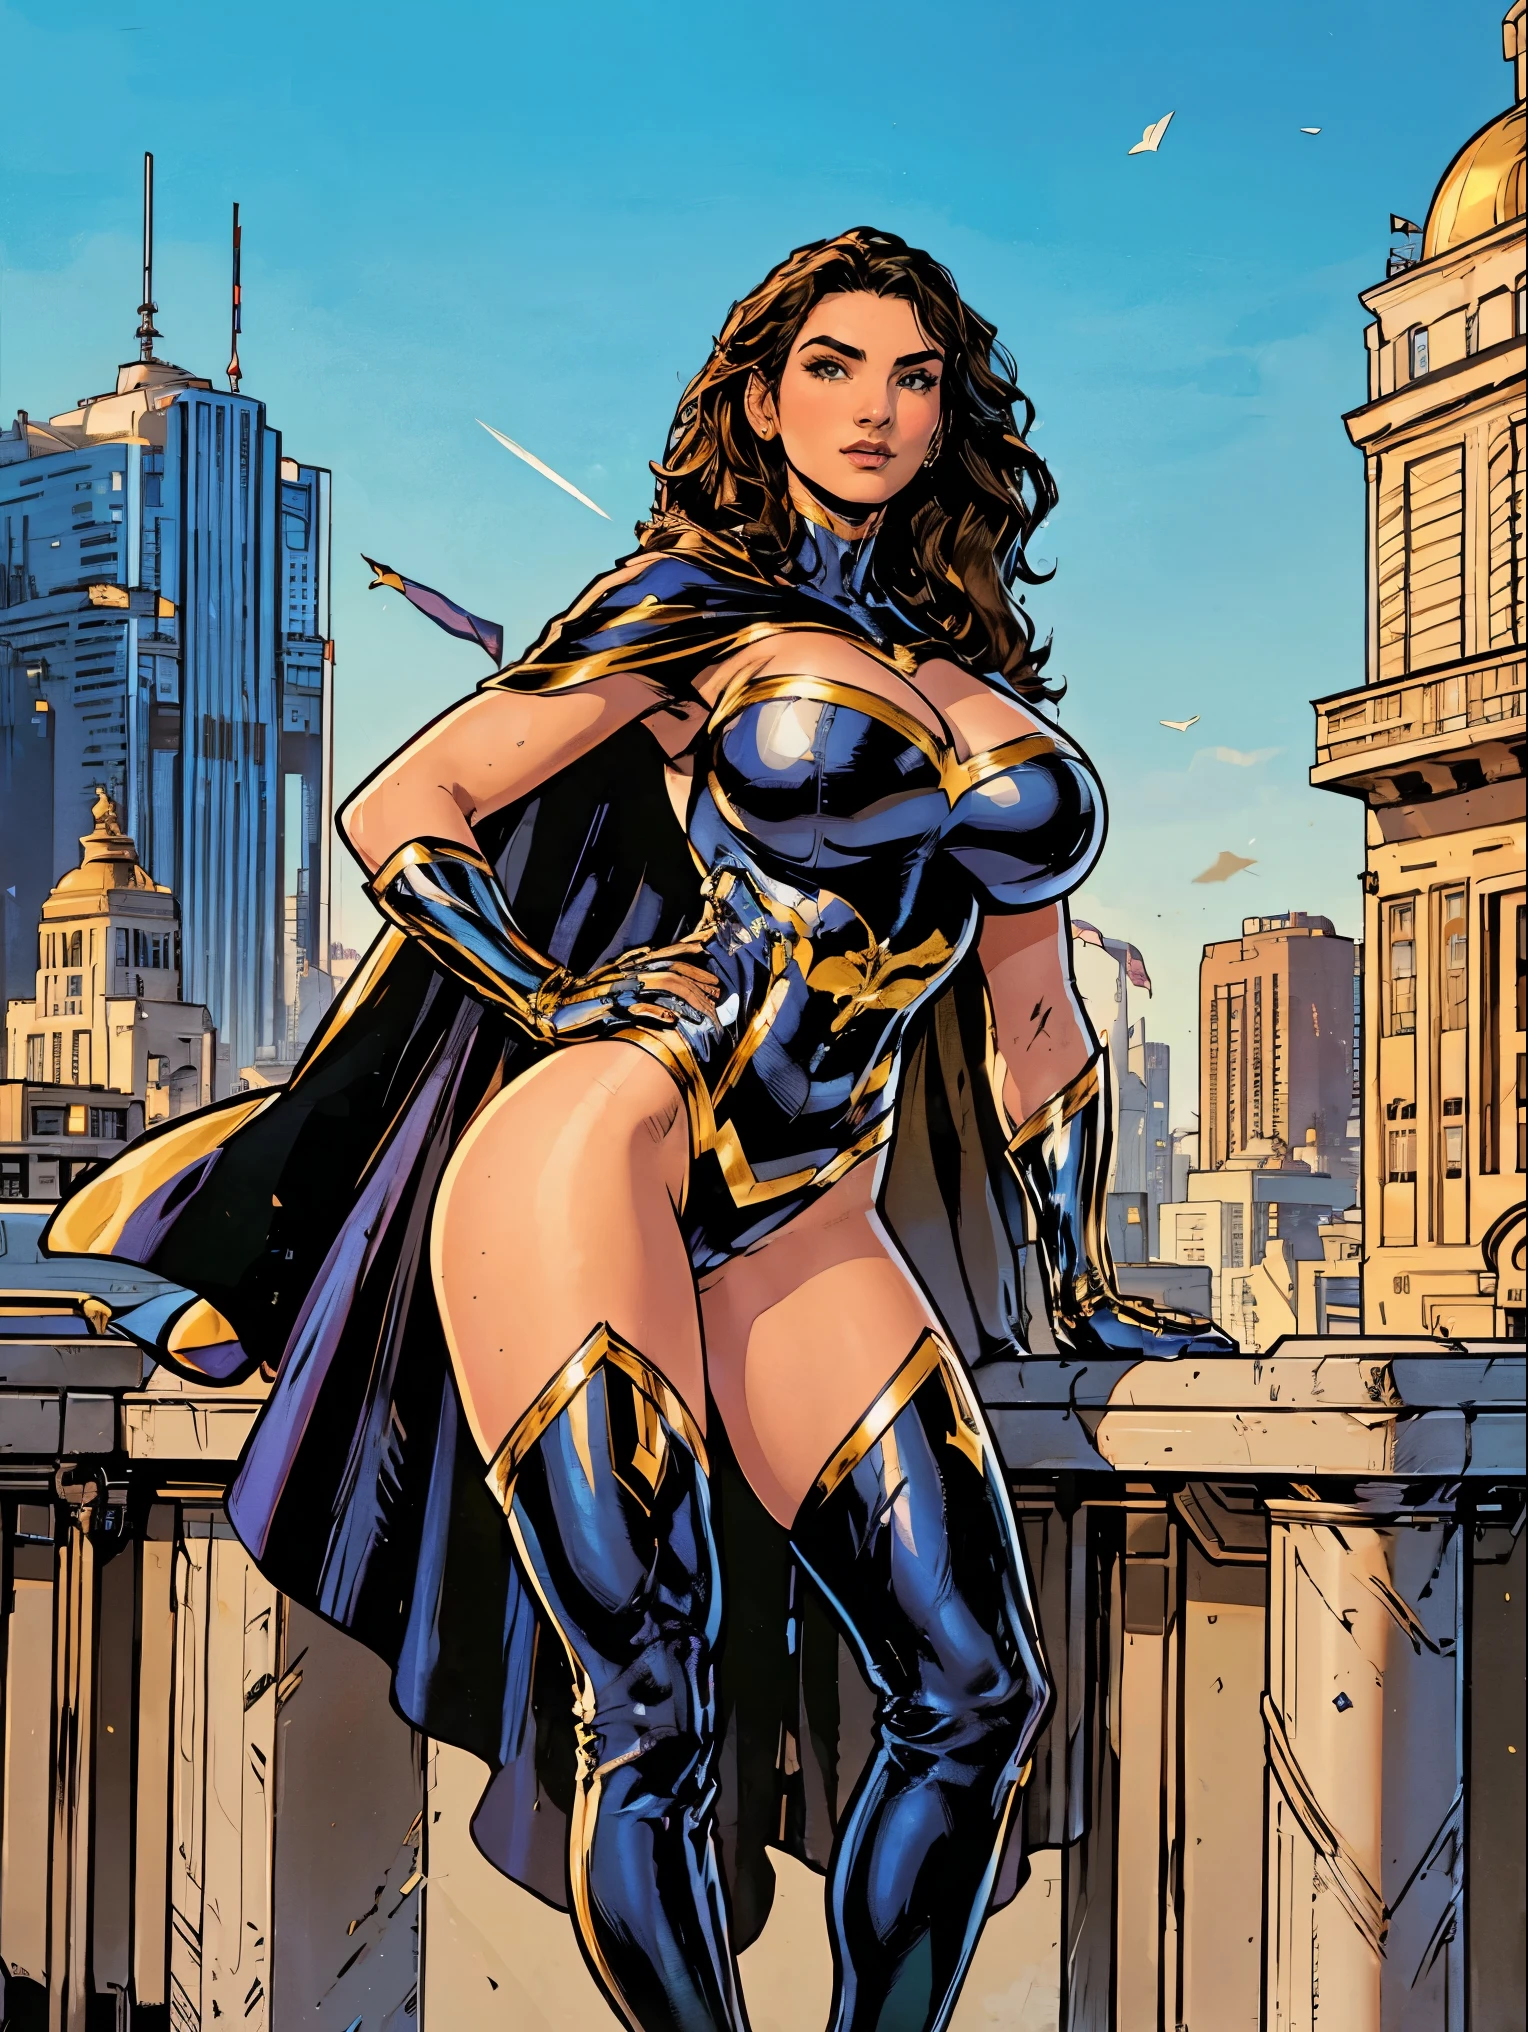 Gorgeous and sultry busty athletic (thin) brunette with sharp facial features and a (large nose) and (huge boobs) wearing a white and gold superhero leotard, cape, gloves, thigh-high boots. City skyline, rooftops, daytime.